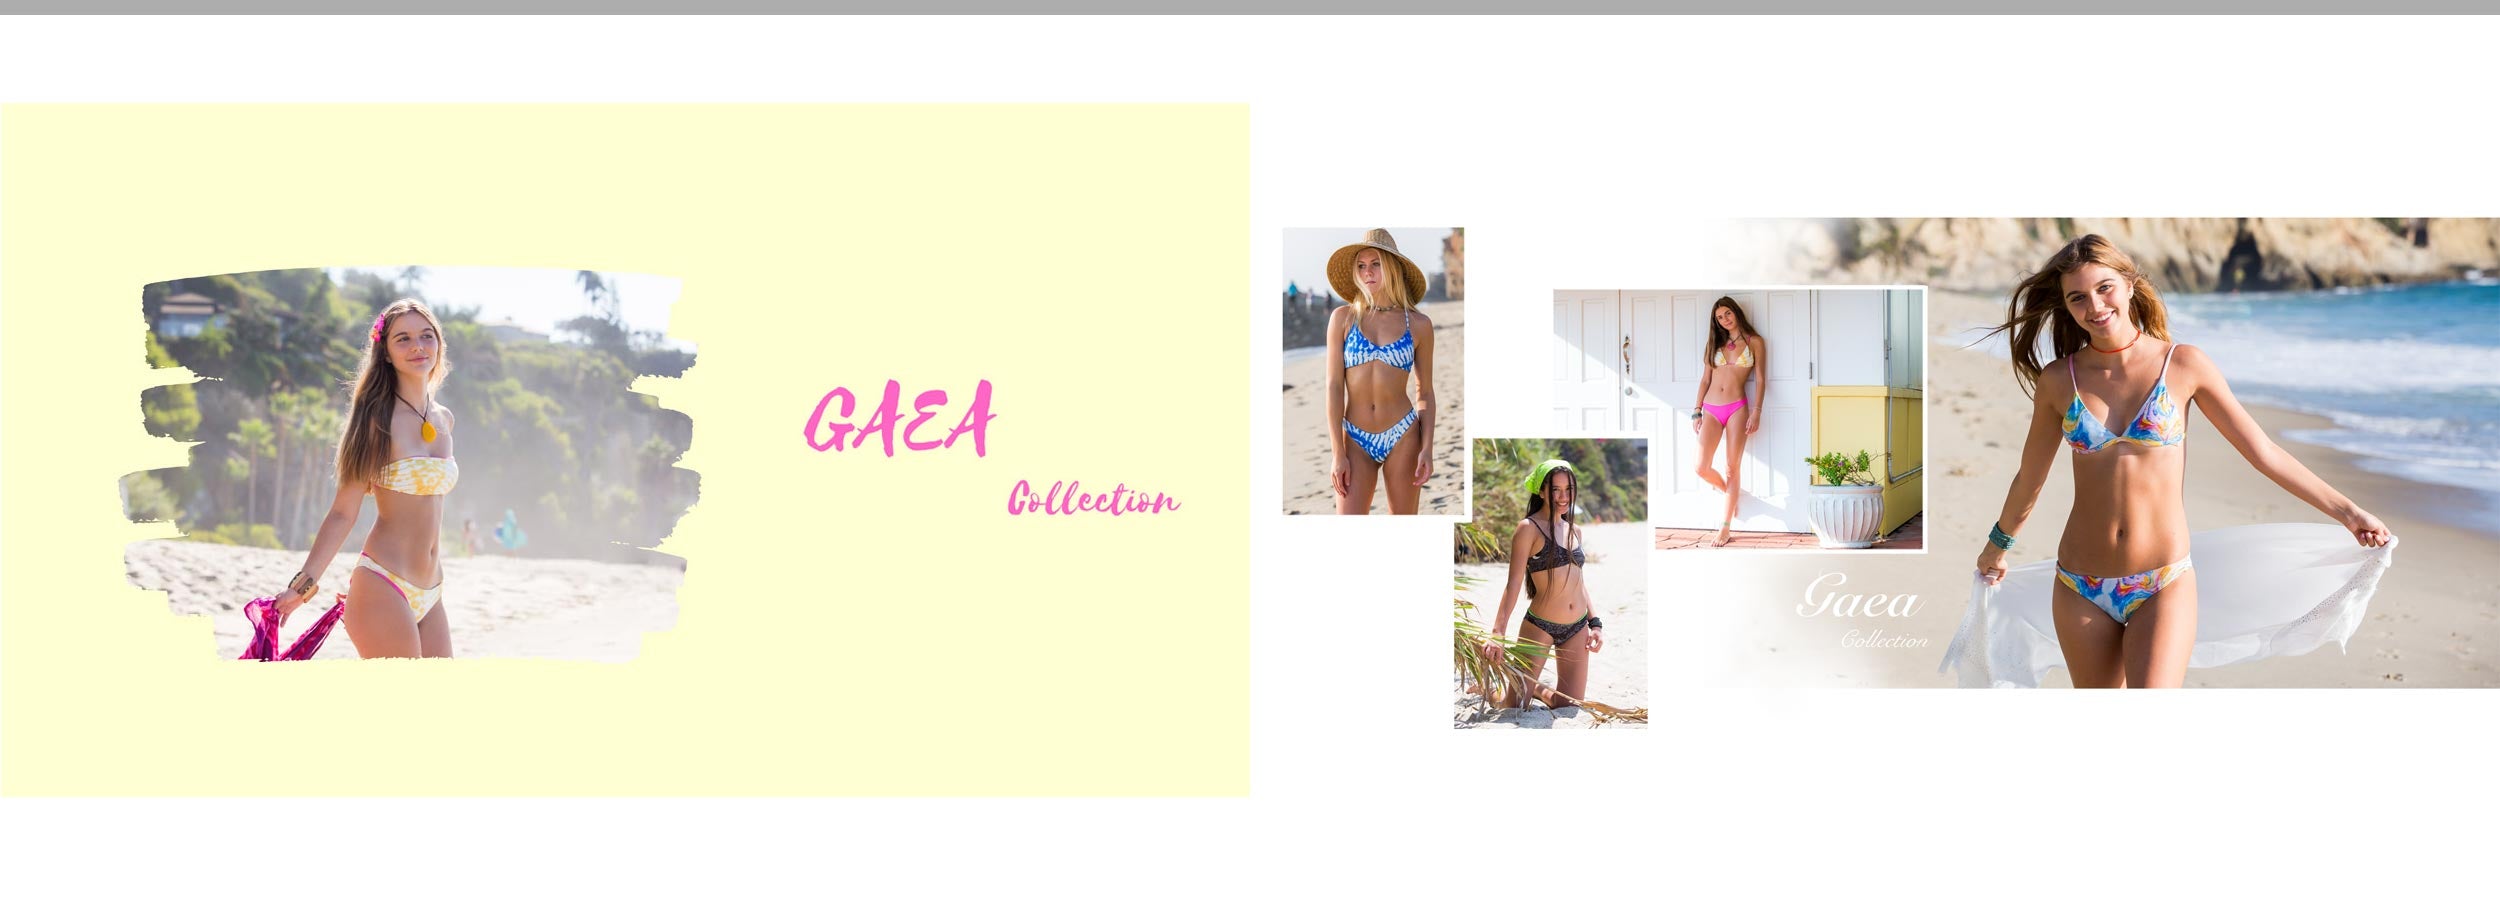 Gaea-collection-new-swimsuits-colorful-reversible-sustainable-by-chanceloves-an-american-teen-women-swim-brand